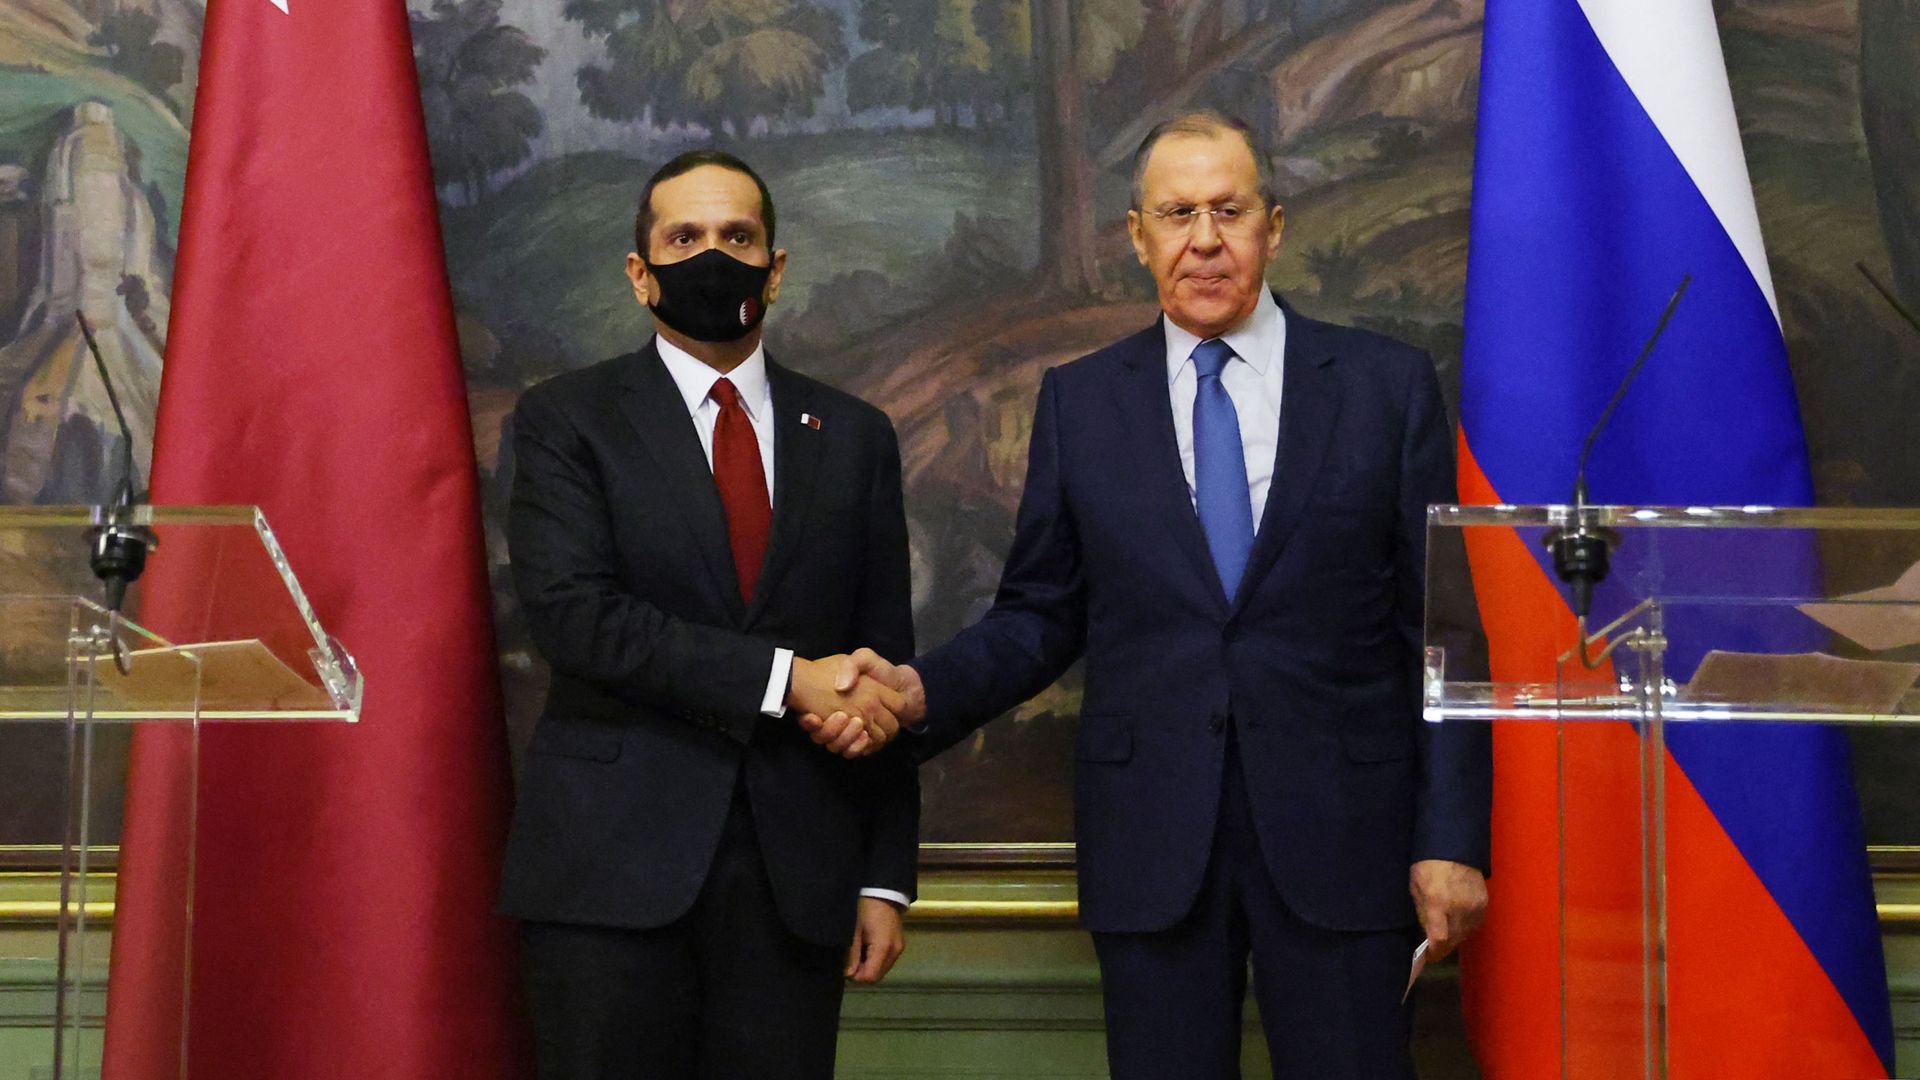 Russian Foreign Minister Sergei Lavrov and Qatari Deputy Prime Minister Sheikh Mohammed bin Abdulrahman Al-Thani hold a joint press conference following their talks in Moscow on March 14, 2022. 